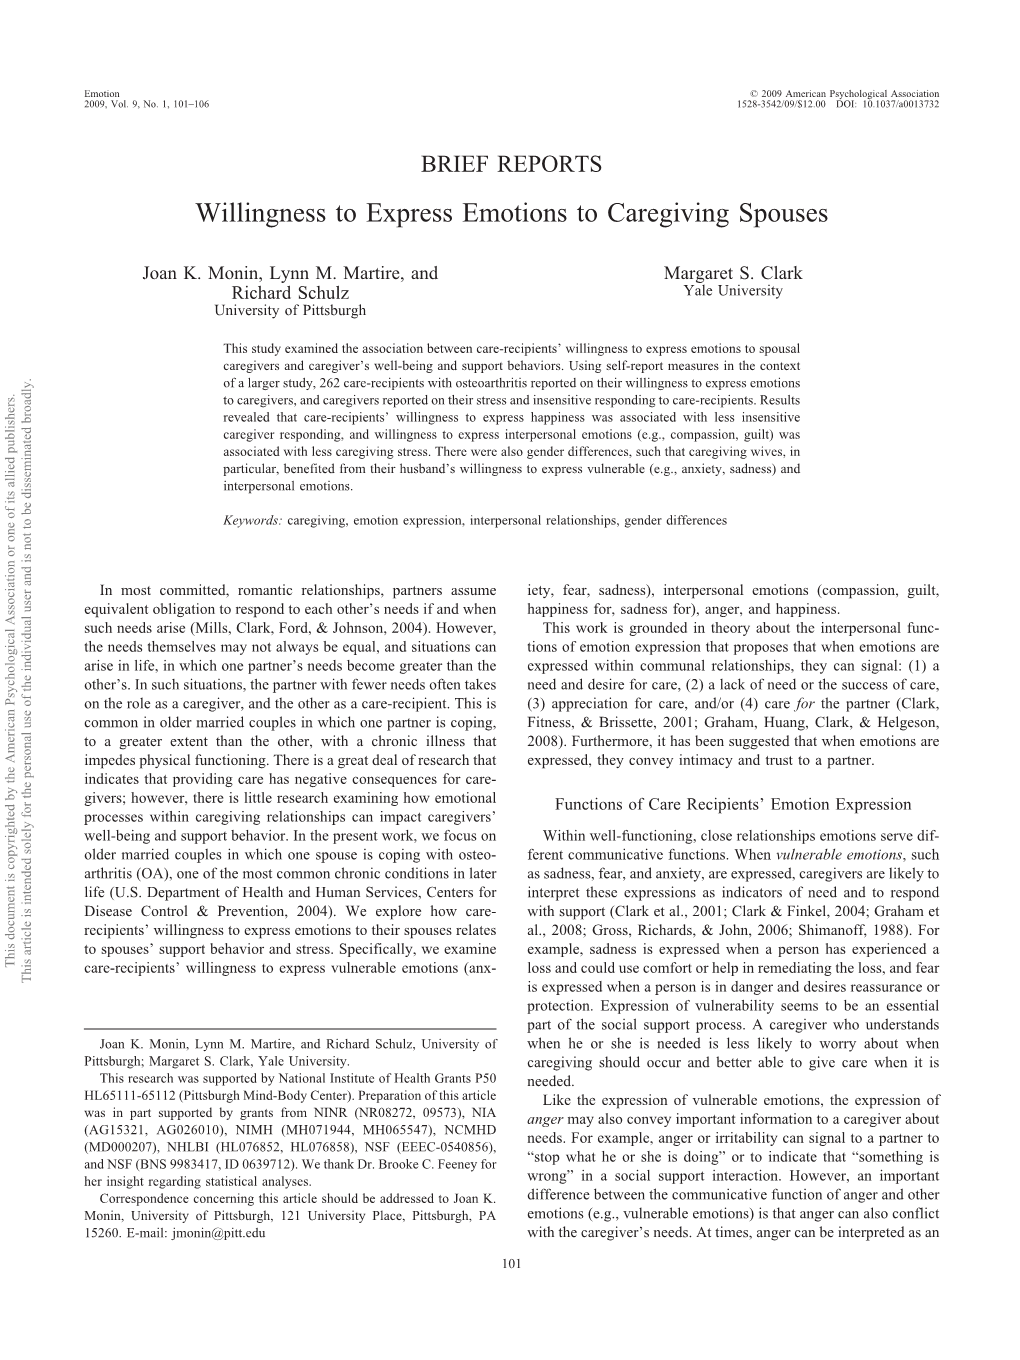 Willingness to Express Emotions to Caregiving Spouses